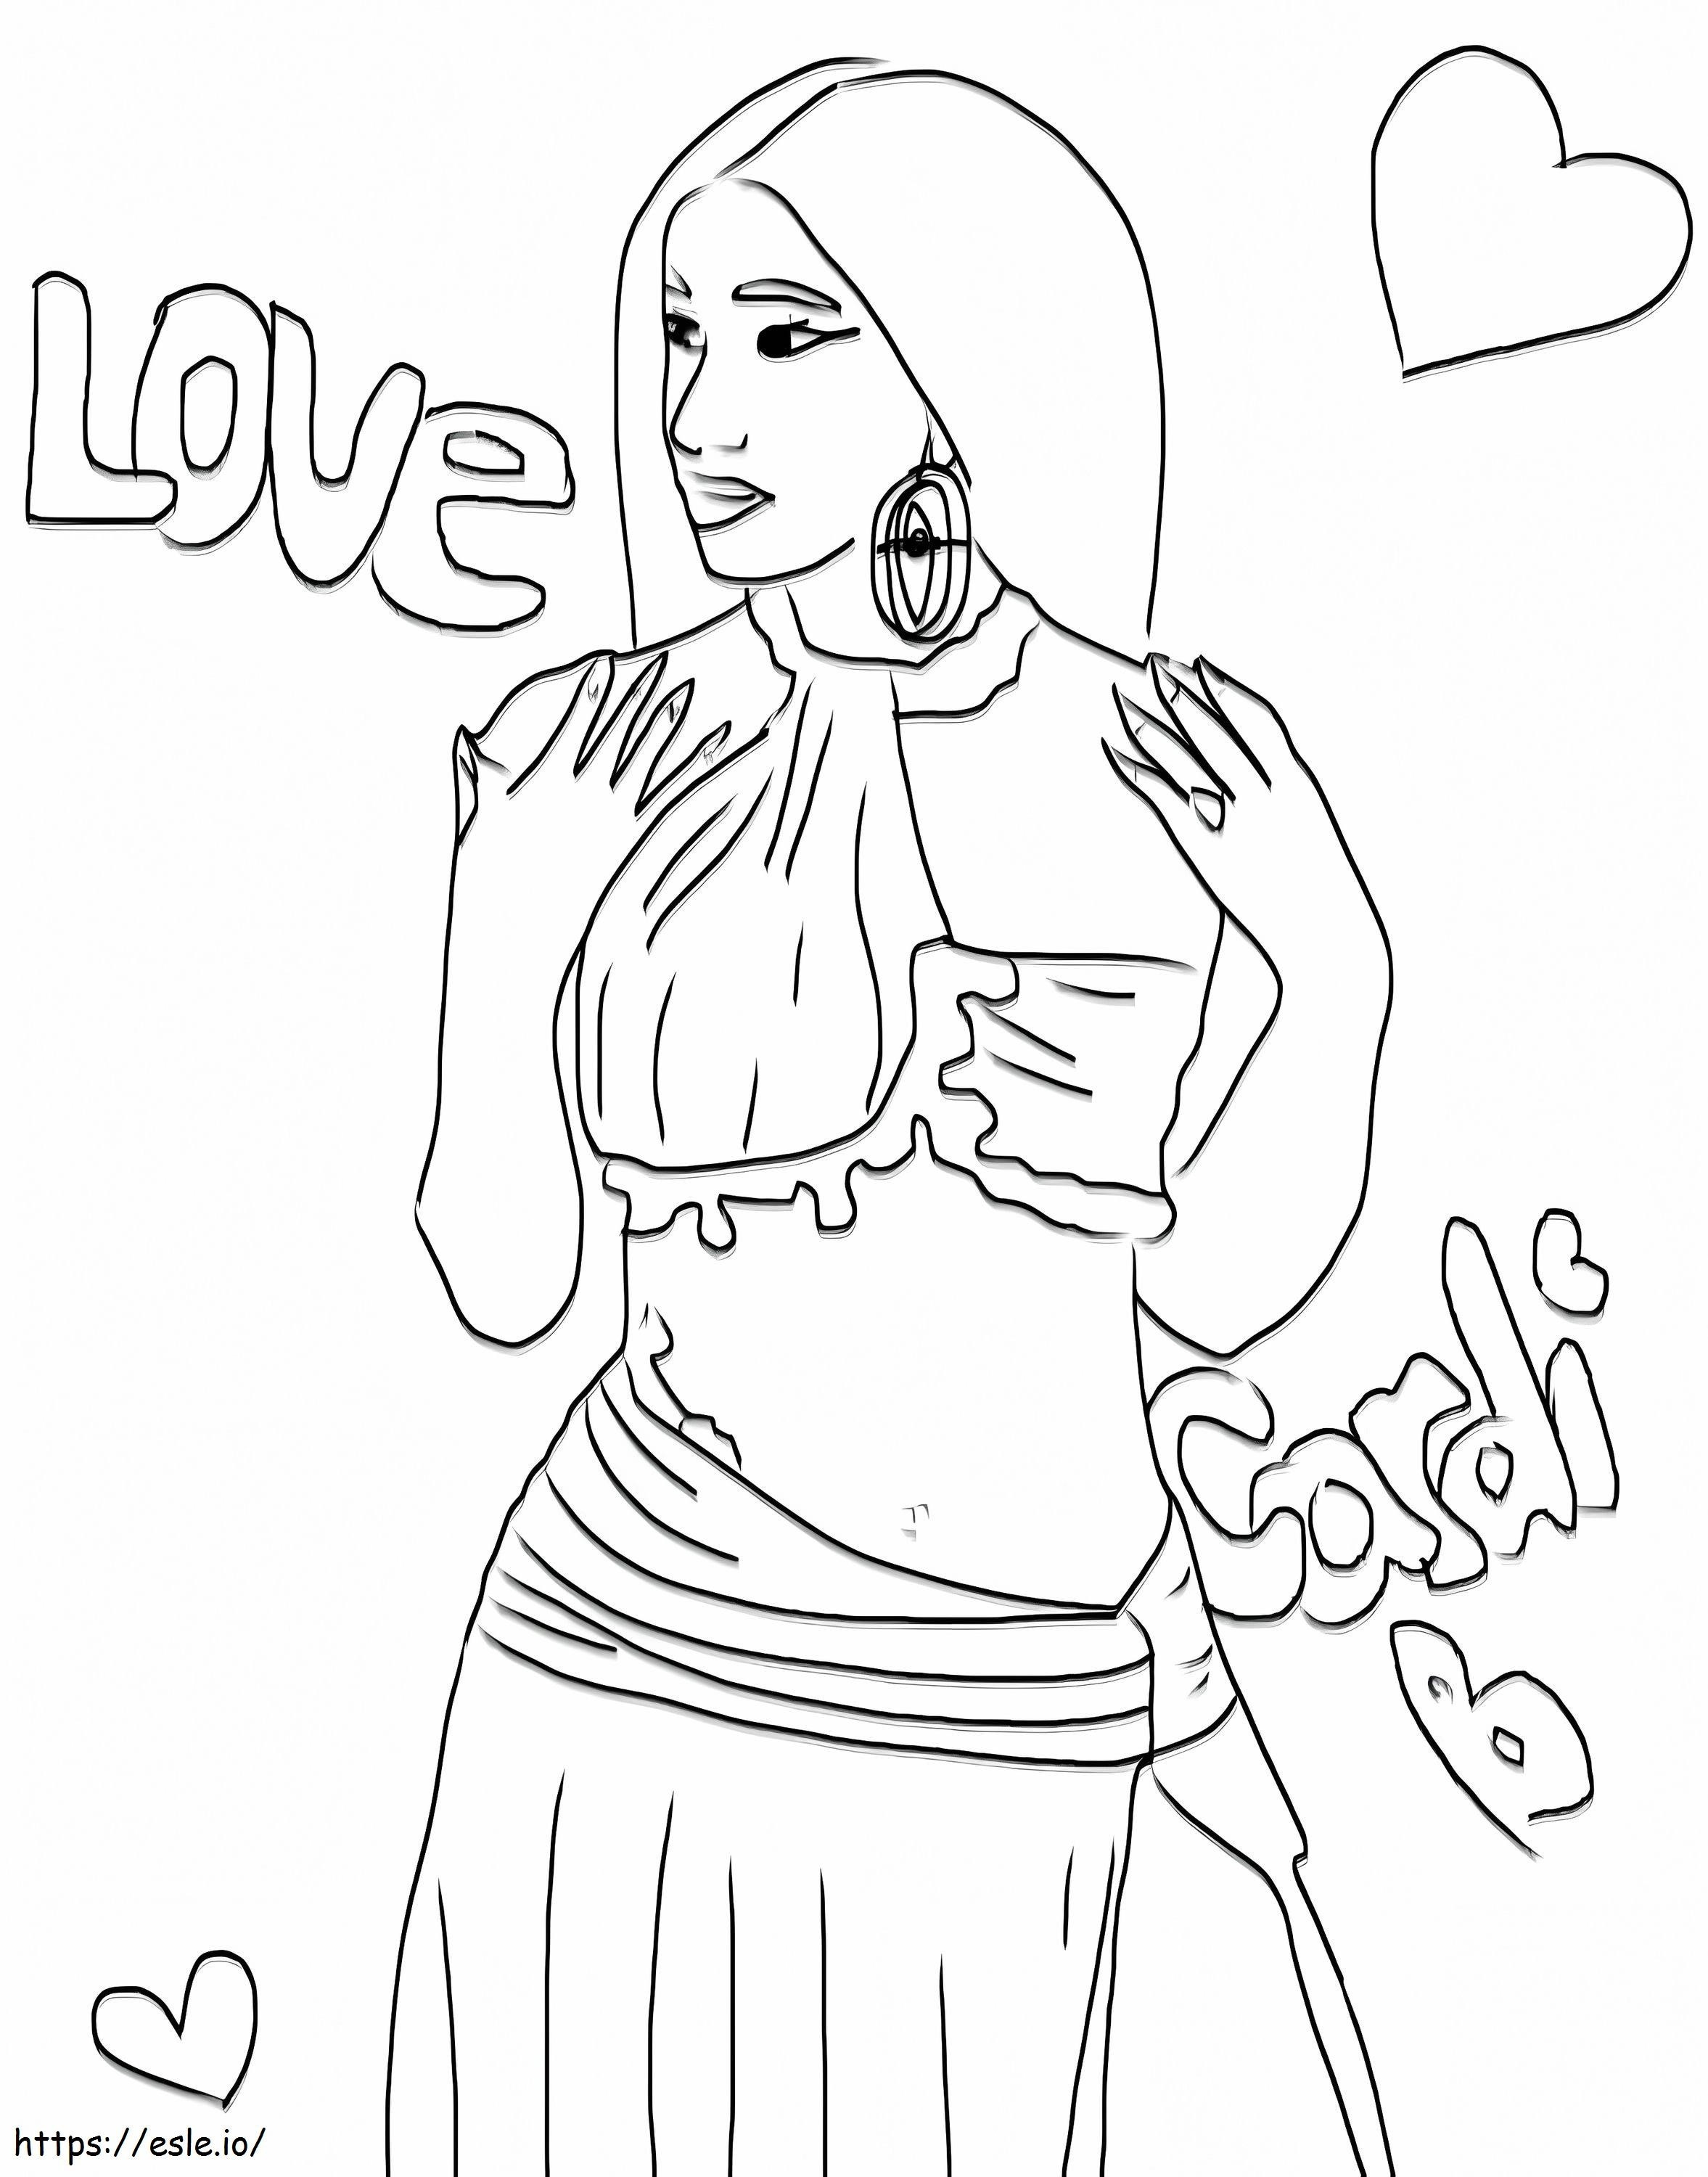 Love Cardi B coloring page